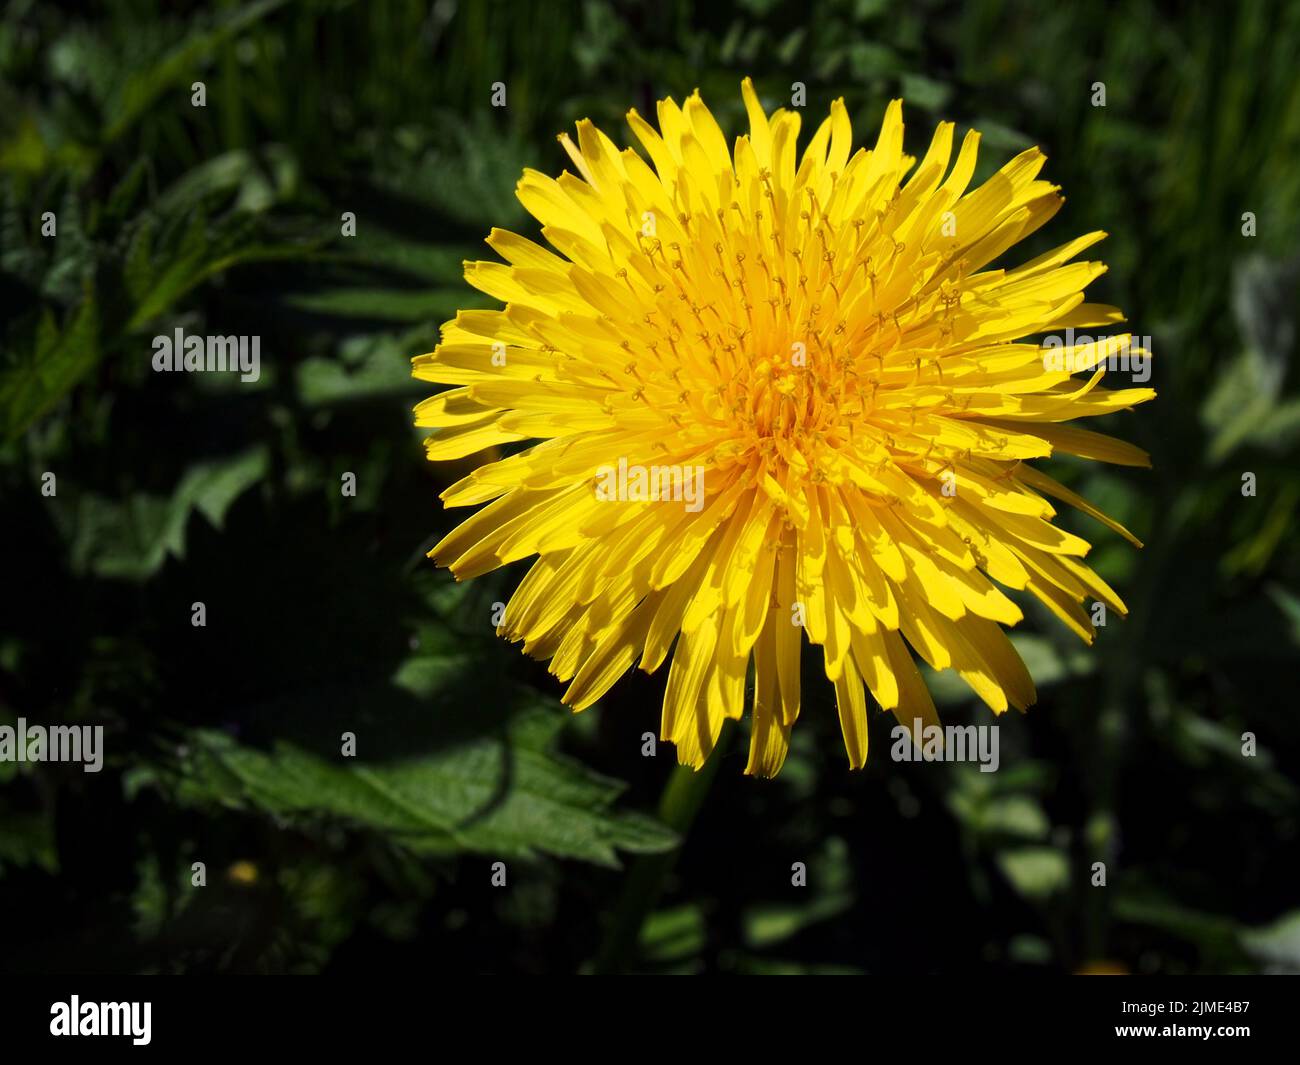 Close up of a bright yellow sunlit dandelion flower against a background or dark green leaves Stock Photo